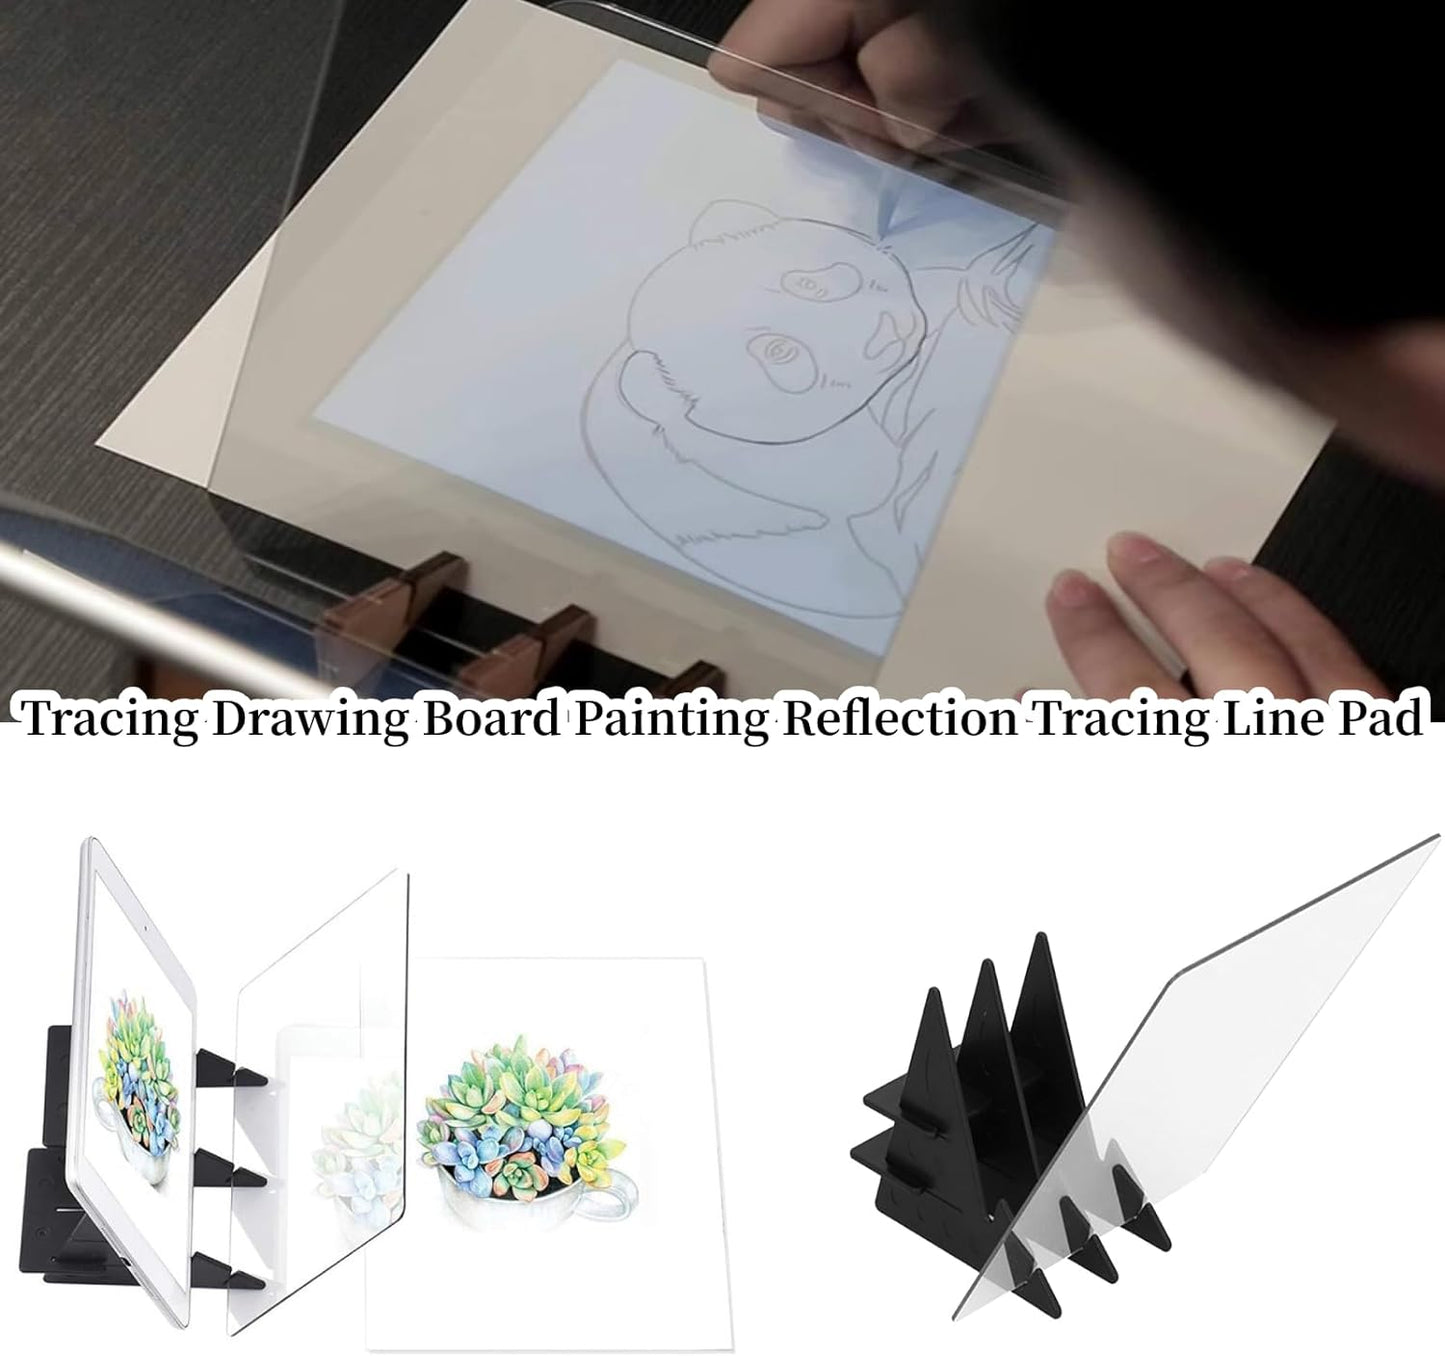 TraceCraft Pro: Painting with Precision 🎨